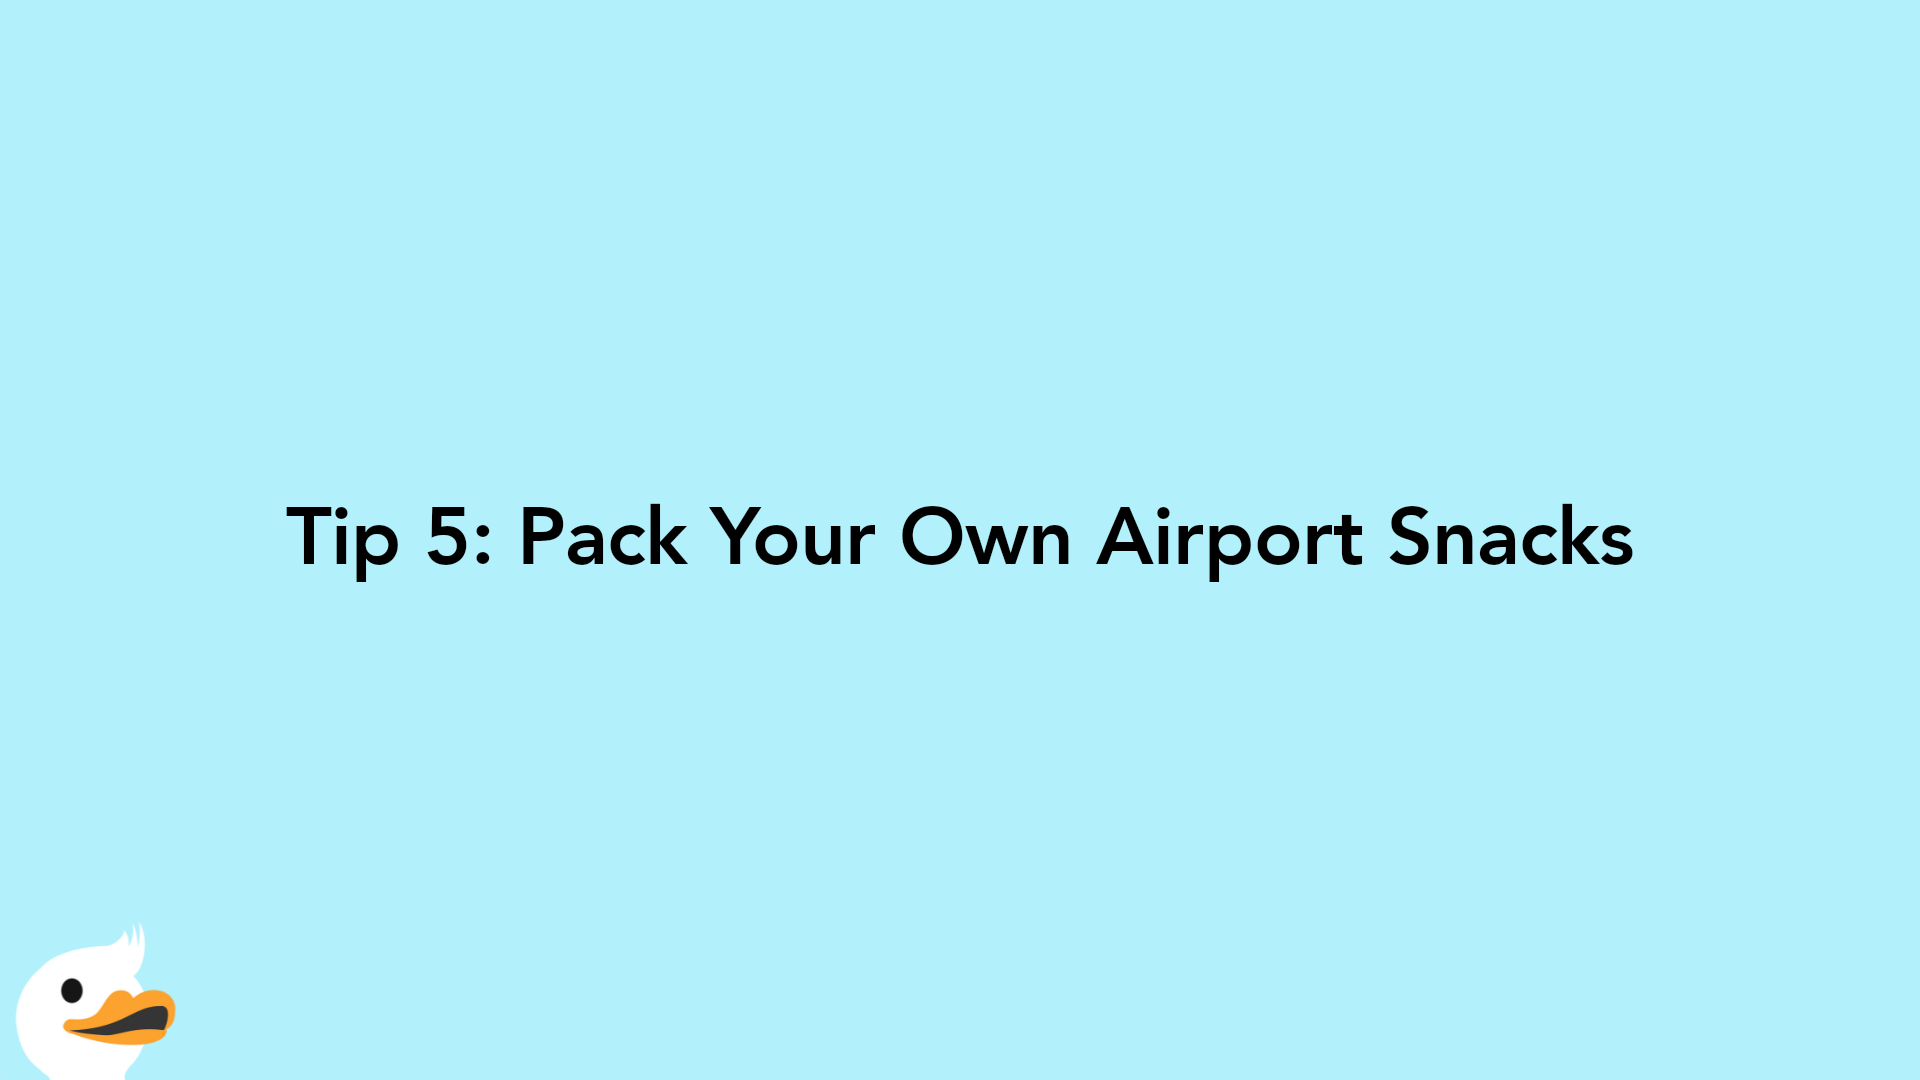 Tip 5: Pack Your Own Airport Snacks